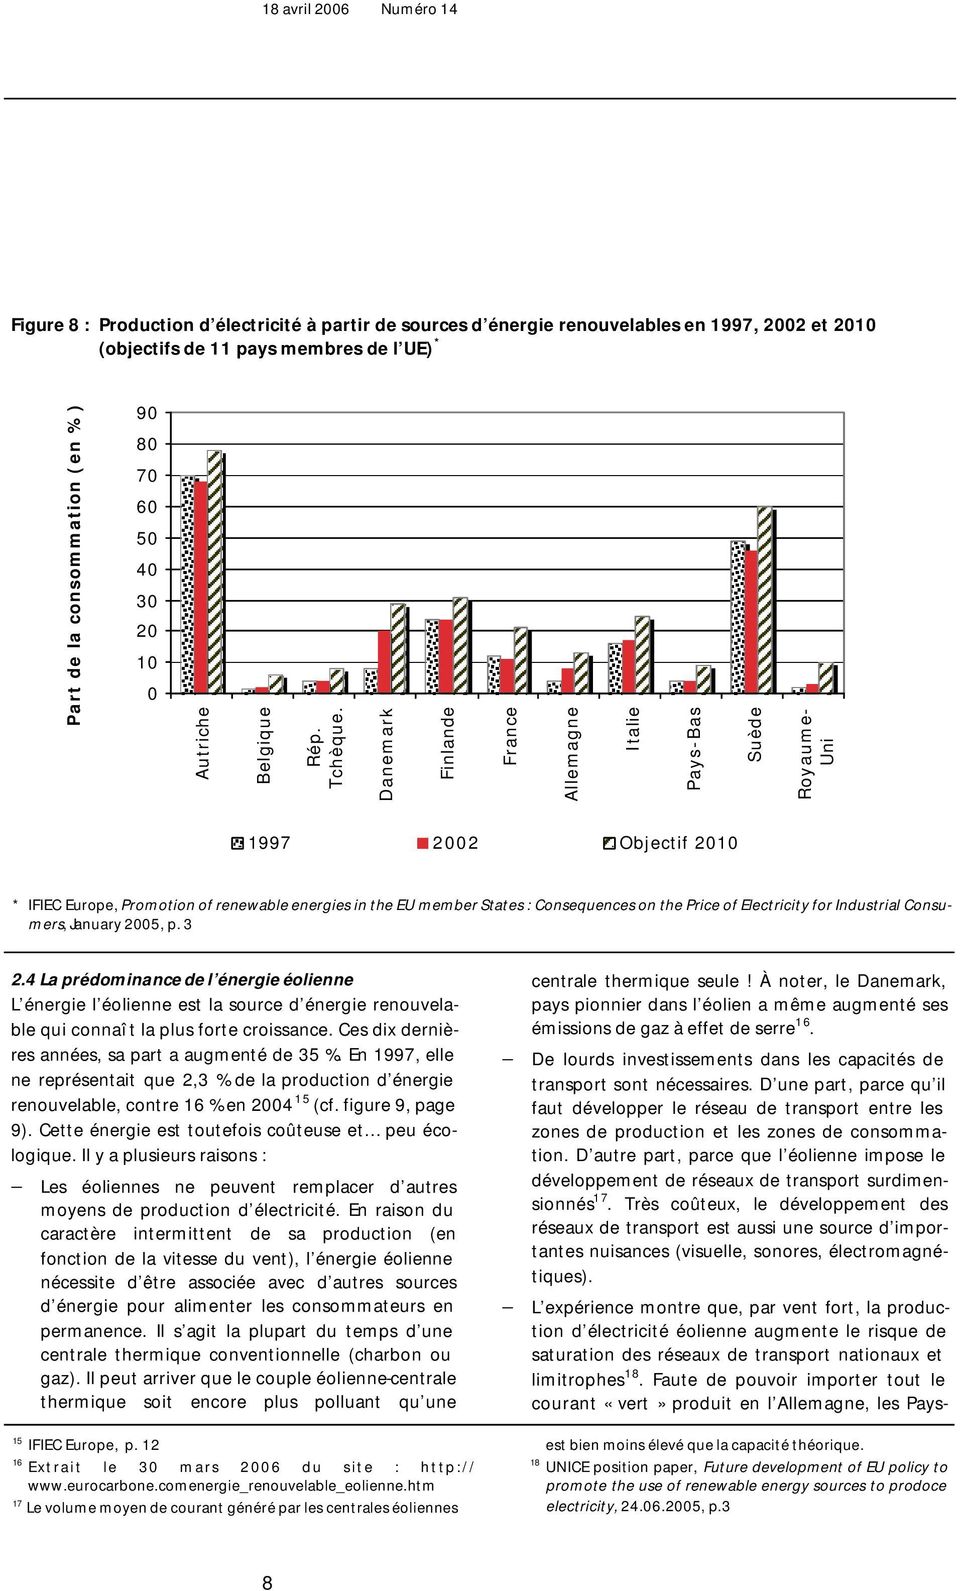 Danemark Finlande France Allemagne Italie Pays-Bas Suède Royaume- Uni 1997 2002 Objectif 2010 * IFIEC Europe, Promotion of renewable energies in the EU member States : Consequences on the Price of